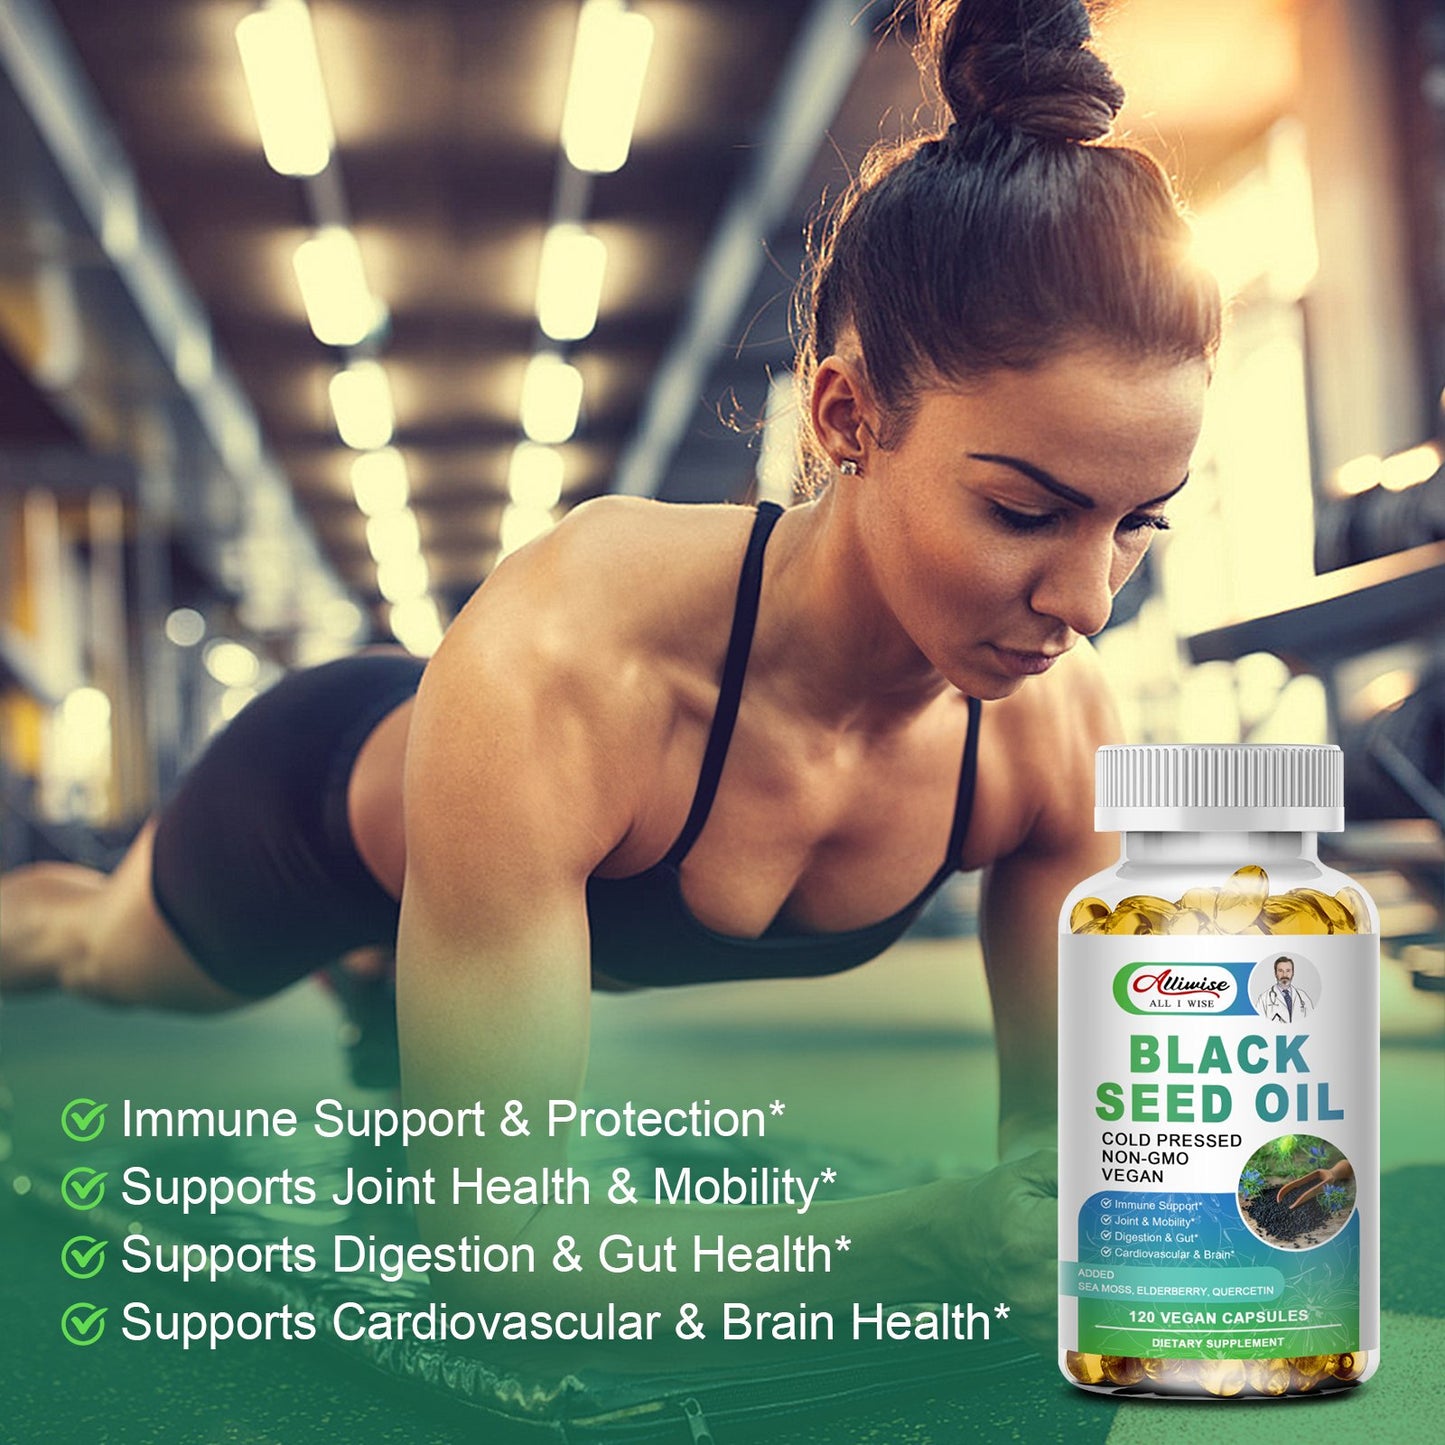 Alliwise Black Seed Oil Capsules Cold Pressed Nigella Sativa Black Cumin Seed Oil, Supports Immune System&Cardiovascular Health, Digestive Health,Joint & Skin Health